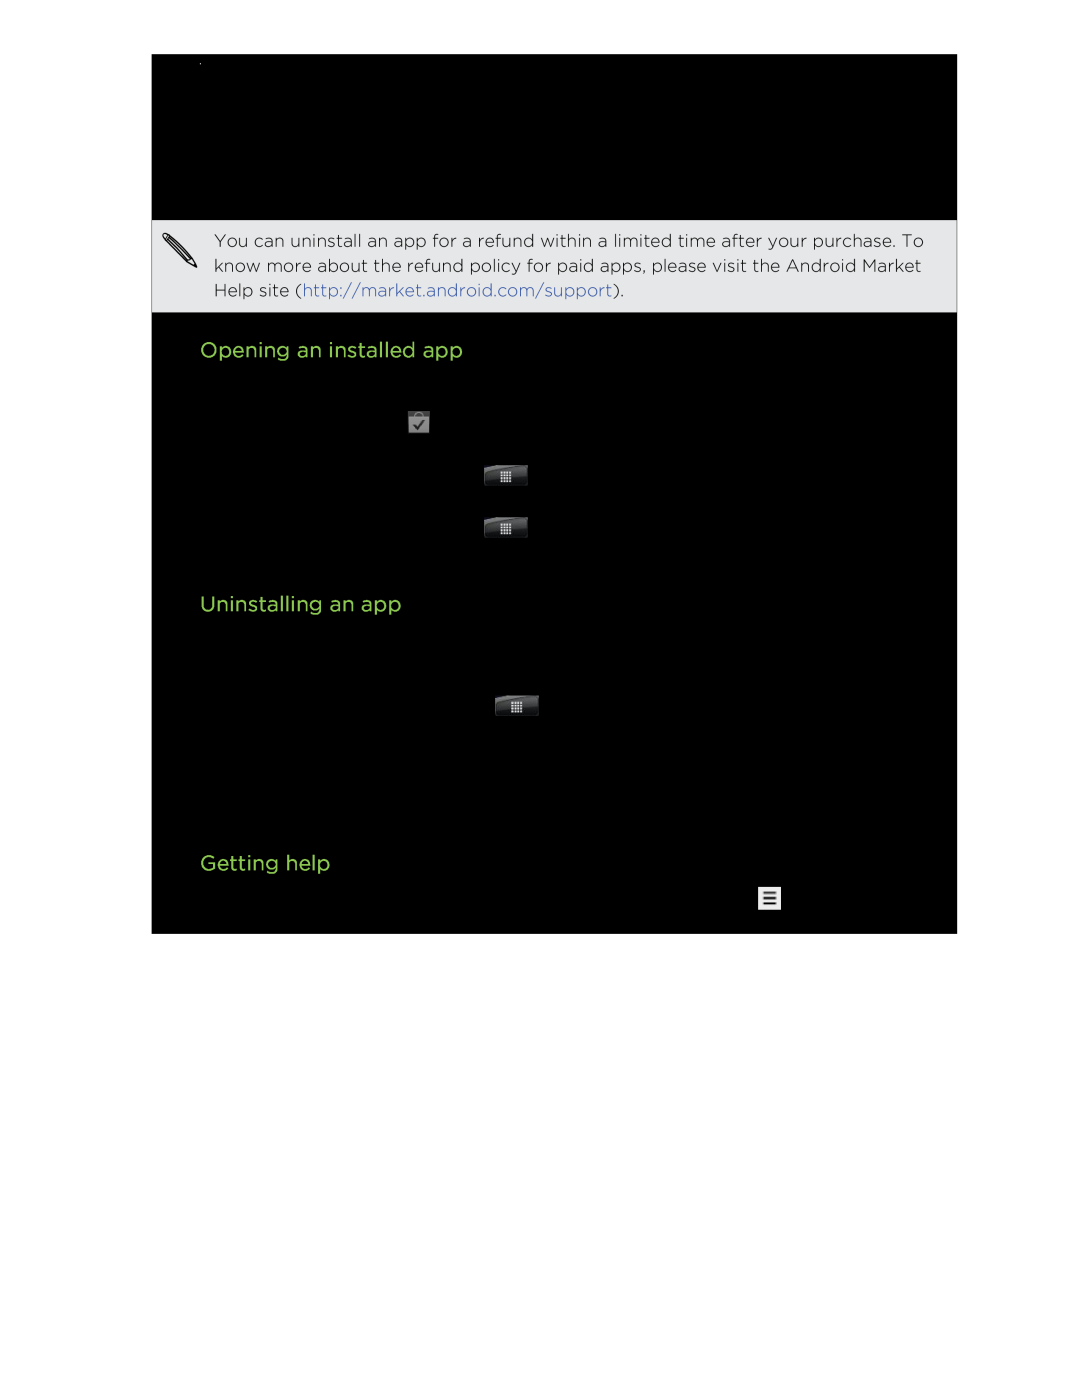 HTC S manual Opening an installed app, Uninstalling an app, Getting help, Market and other apps 